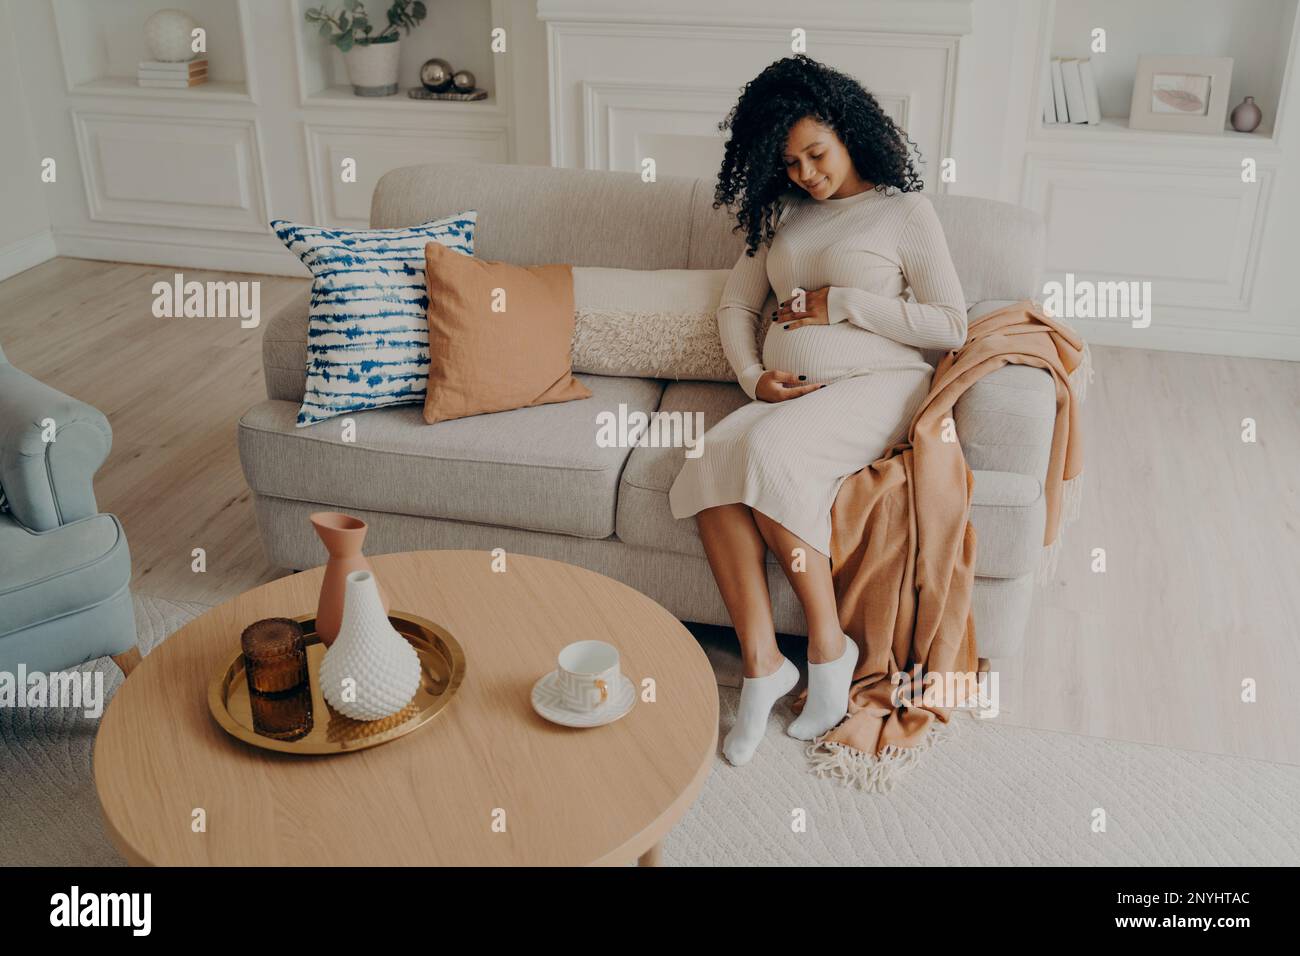 Beautiful photo of pregnant afro american lady sitting on cozy sofa decorated with colorful pillows gently placing hands on her stomach while relaxing Stock Photo